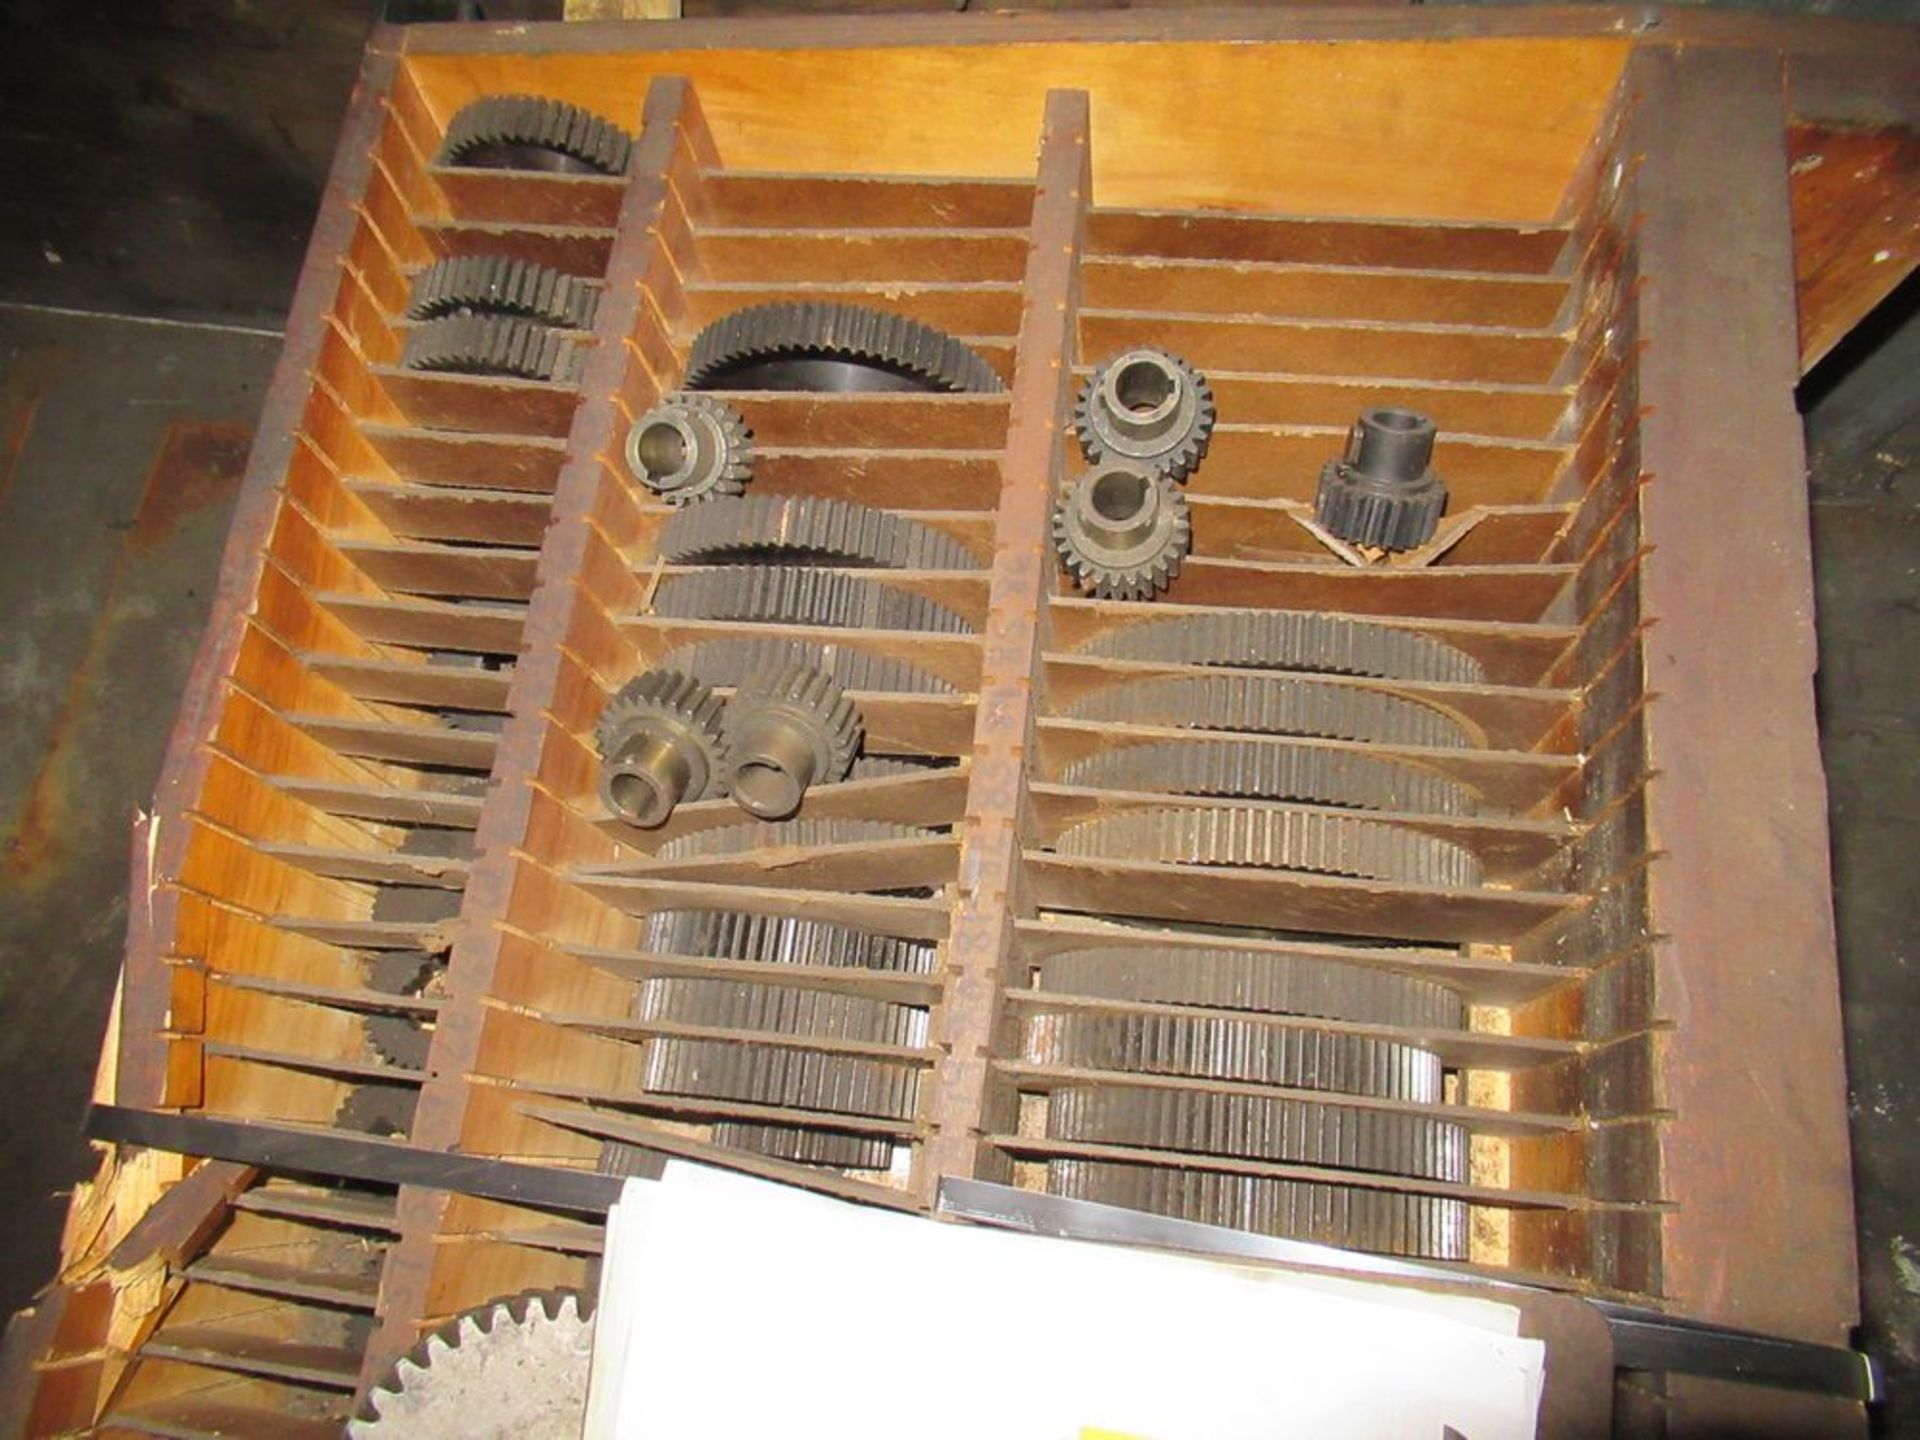 Lot. Machine Parts, Tooling, Hyd. Unit, Gears, Electrical ($50 Rigging Cost) - Image 6 of 7